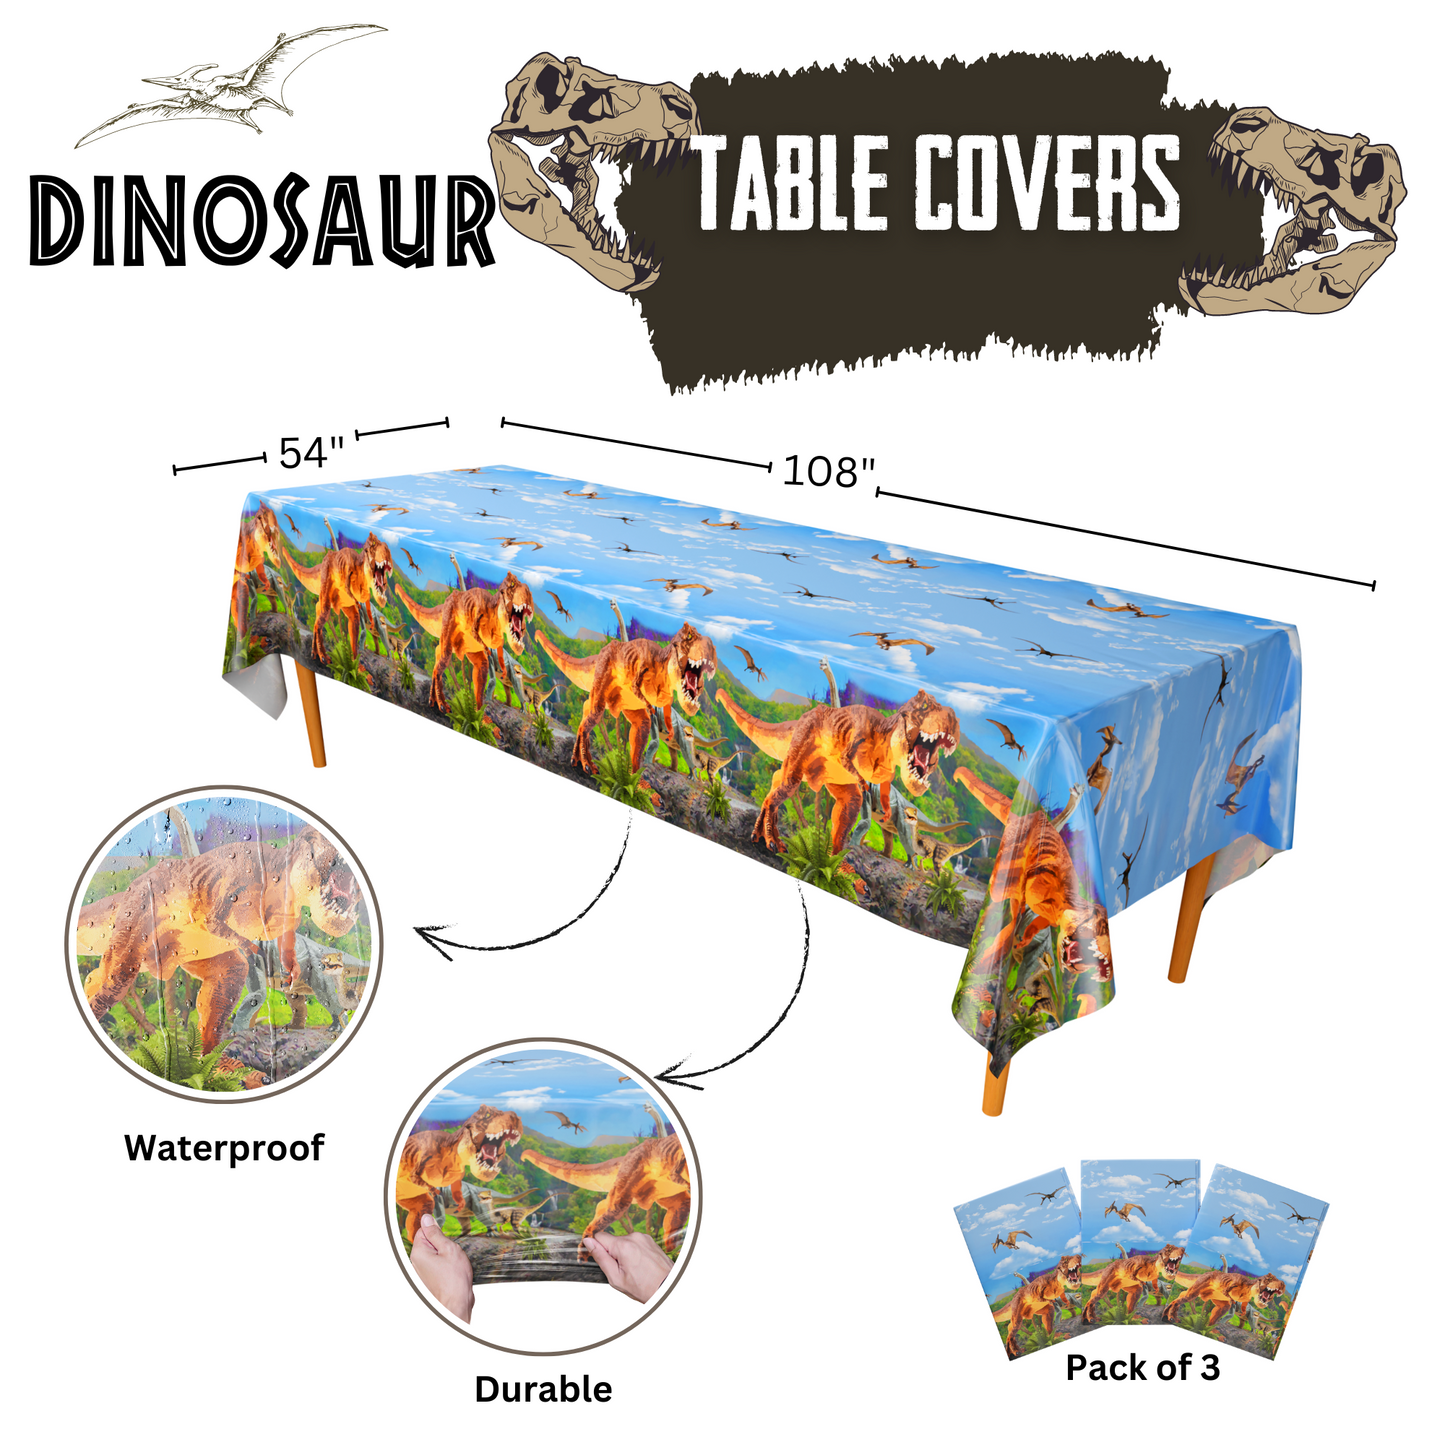 Dinosaur Table Covers (Pack of 3)